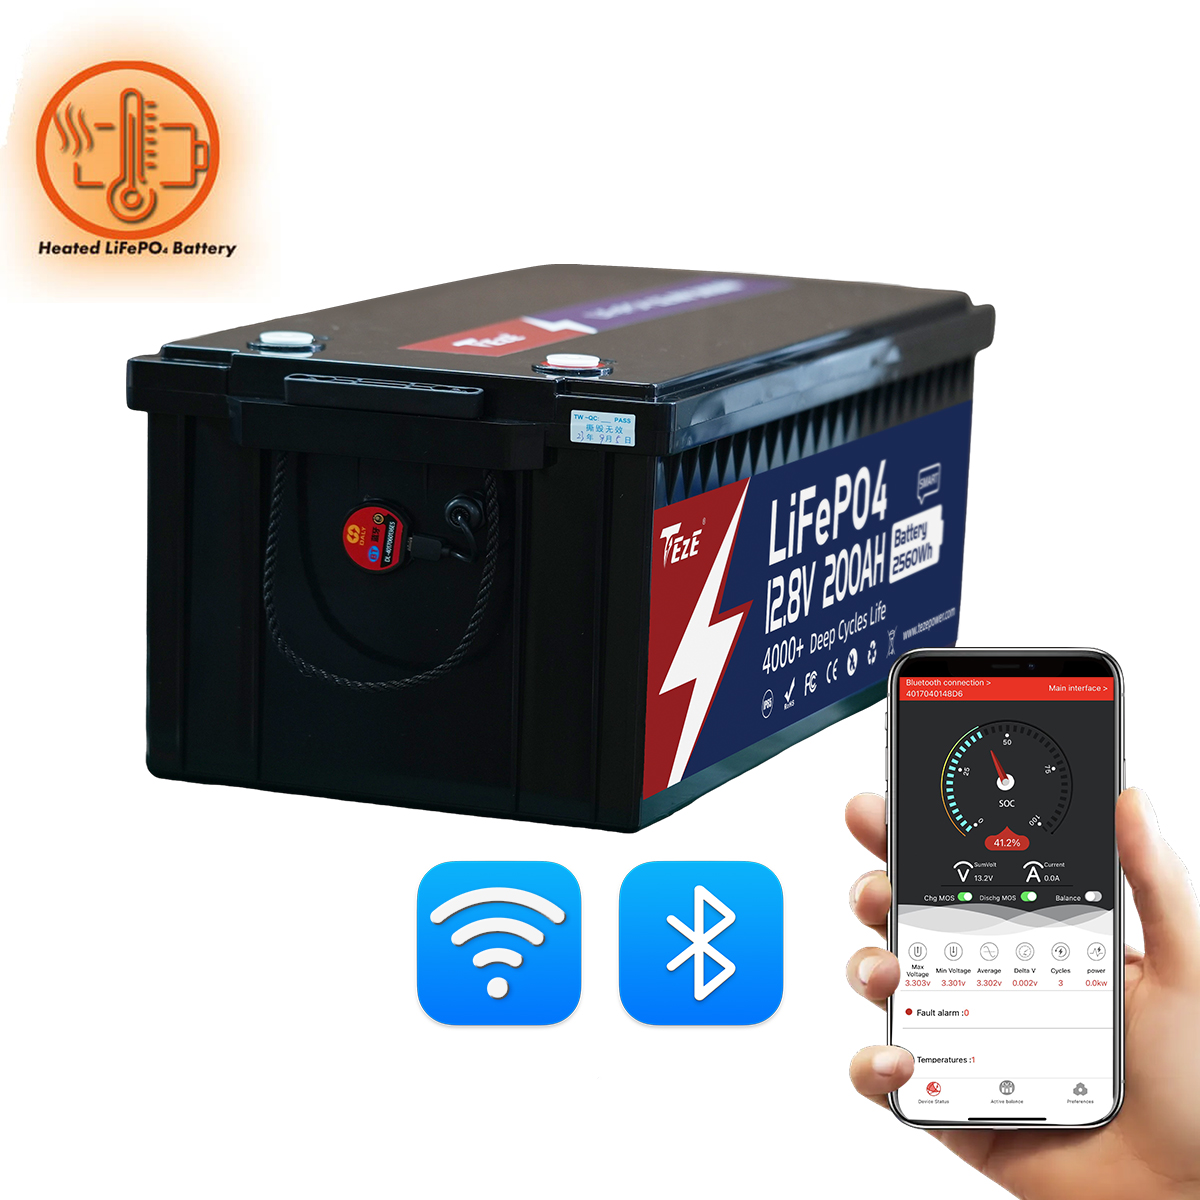 New Add WiFi-TezePower 12V 200Ah LiFePO4 Battery with WiFi and Bluetooth, Self-heating and Active Balancer, Built-in 200A Daly BMS(WiFi External Version)-TezePower